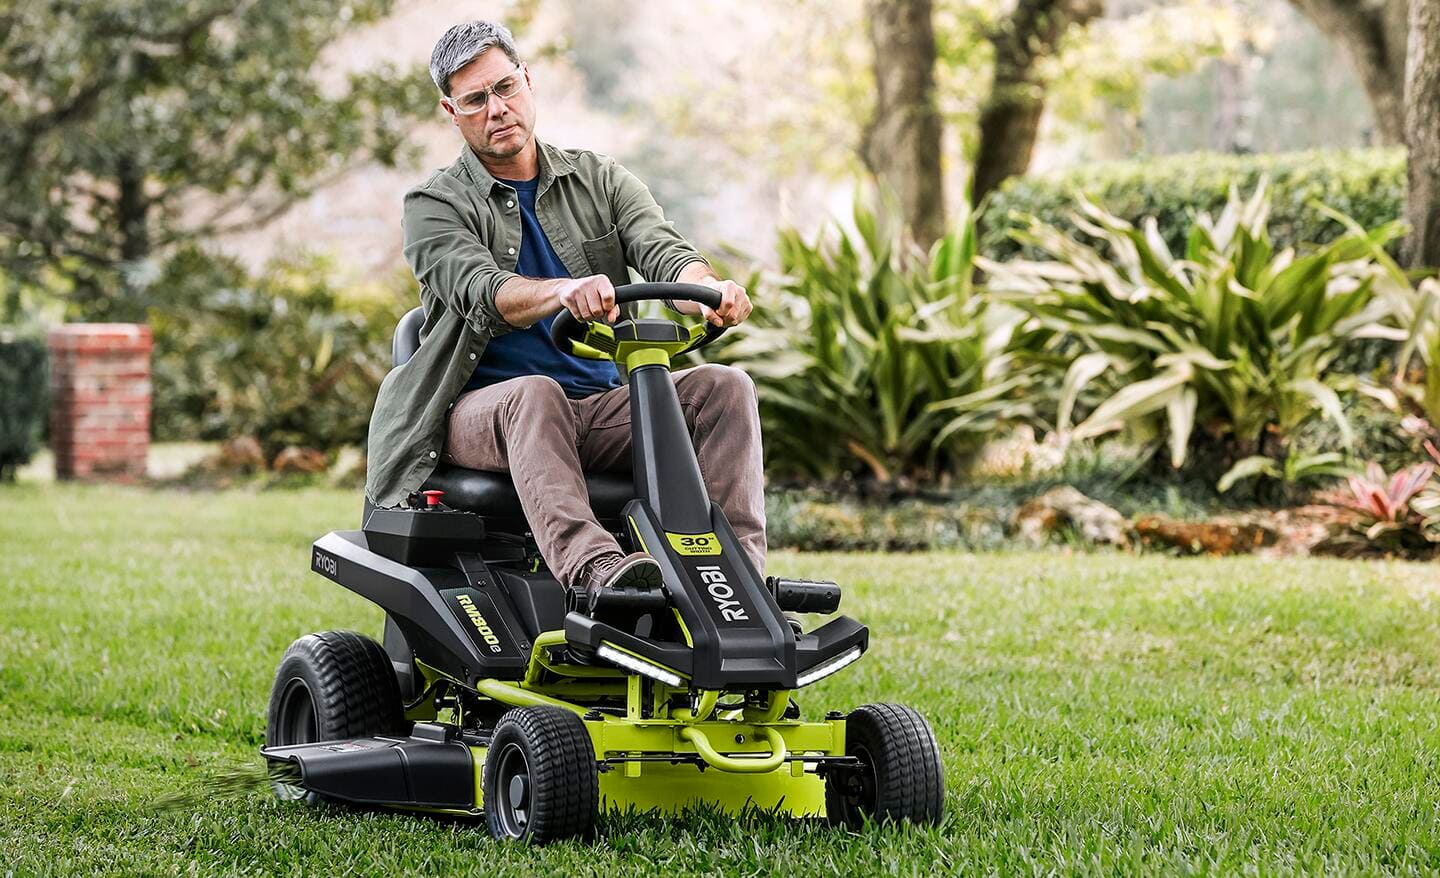 A person riding a rear engine riding mower. 